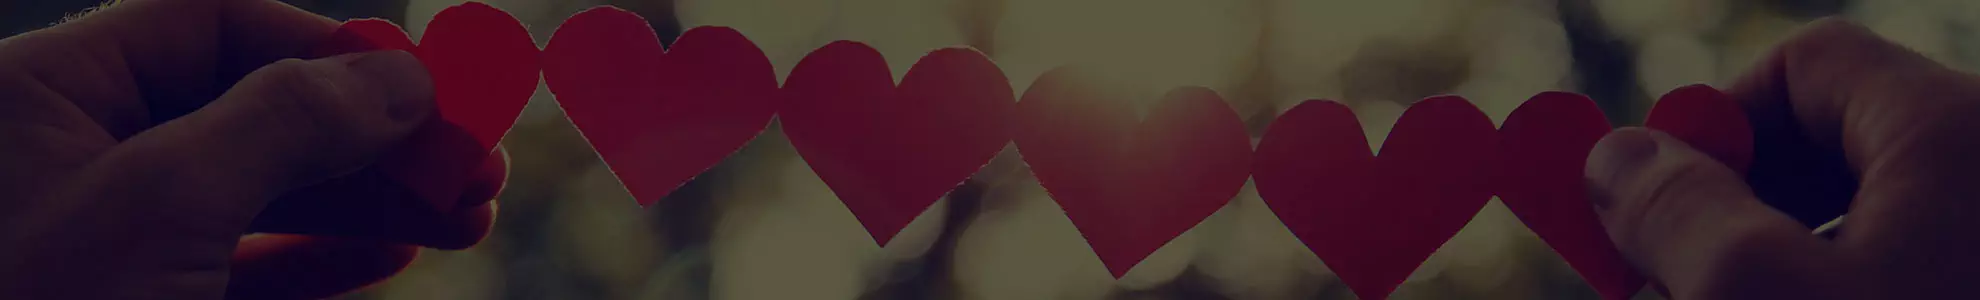 Background image of person holding up string of paper hearts